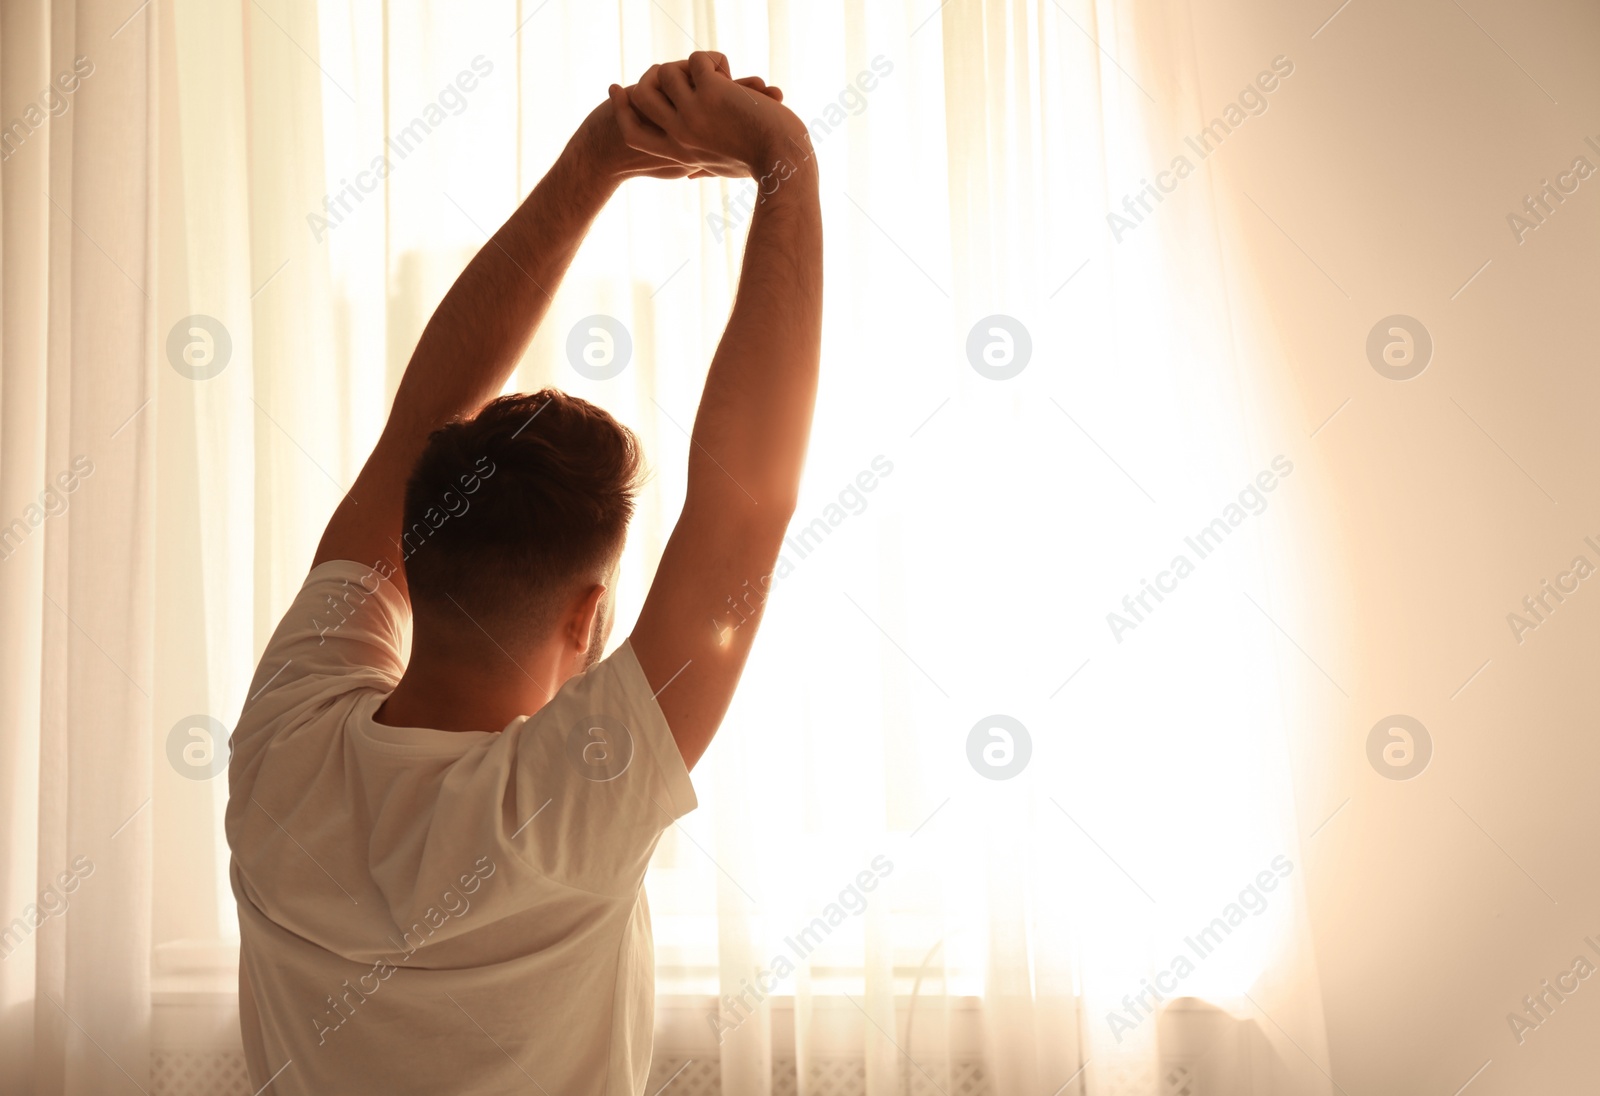 Photo of Man stretching near window at home, view from back. Lazy morning